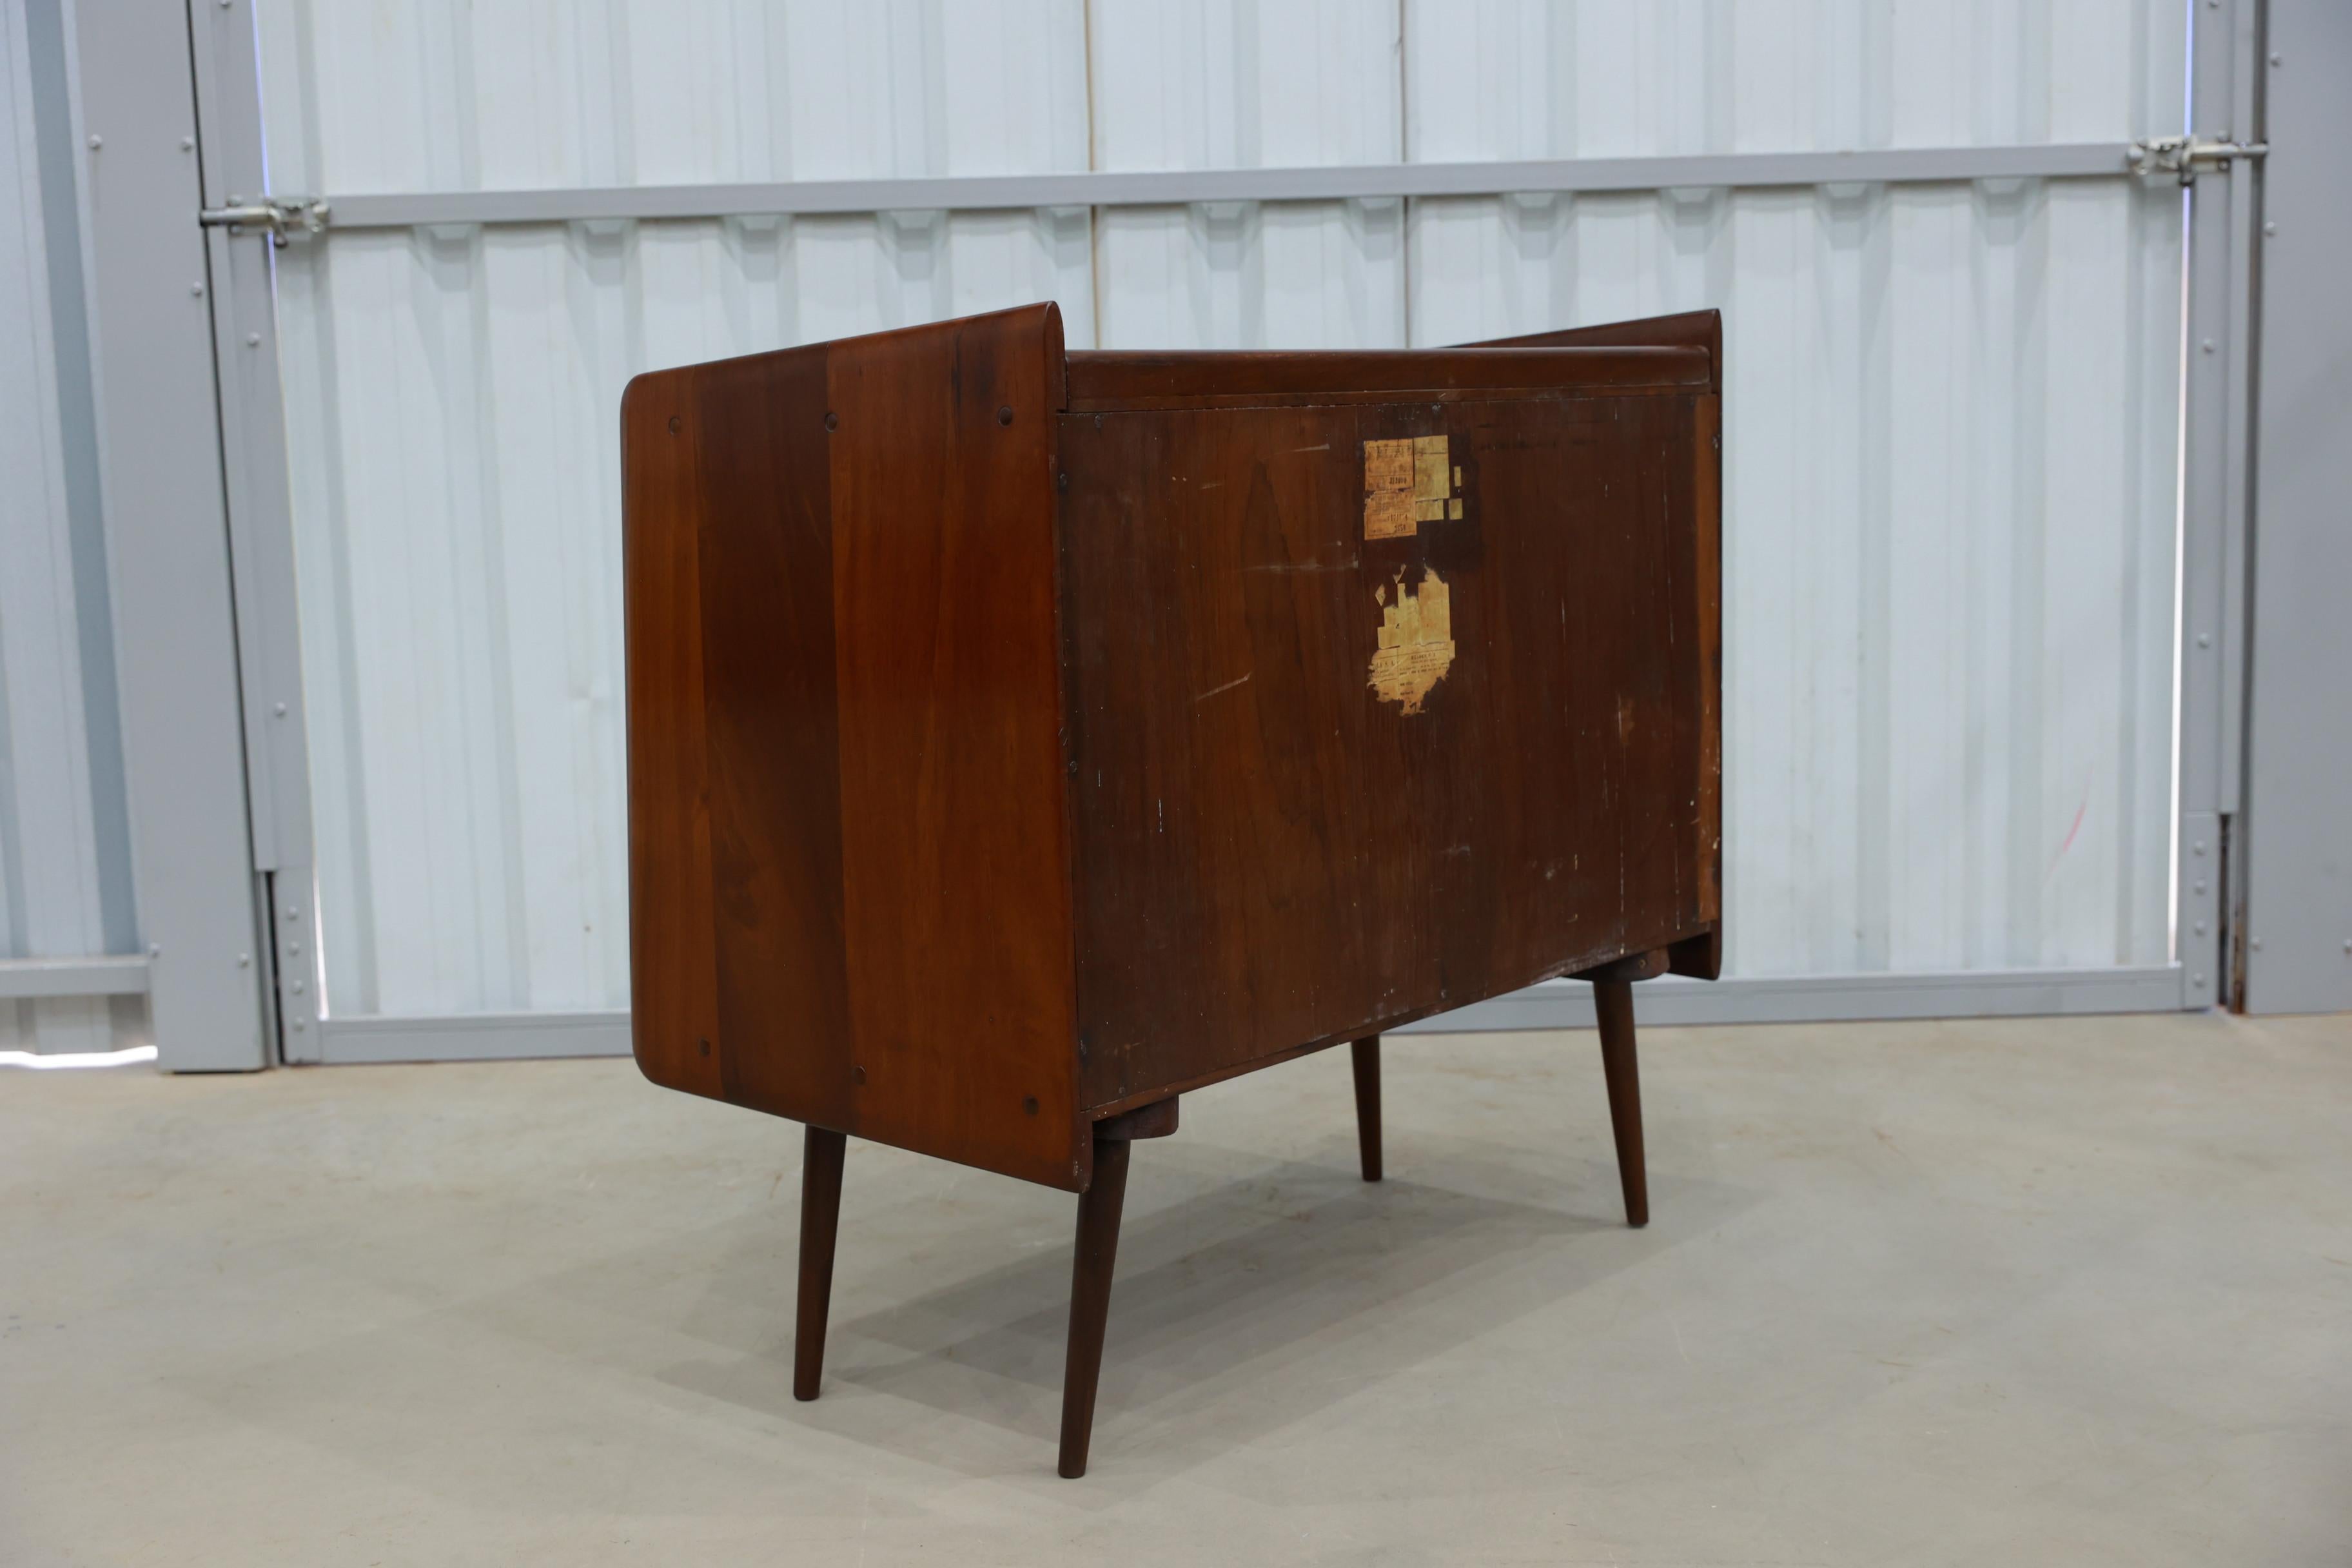 Brazilian Modern Chest of Drawers in Hardwood by Moveis Cimo, 1950s, Brazil For Sale 3